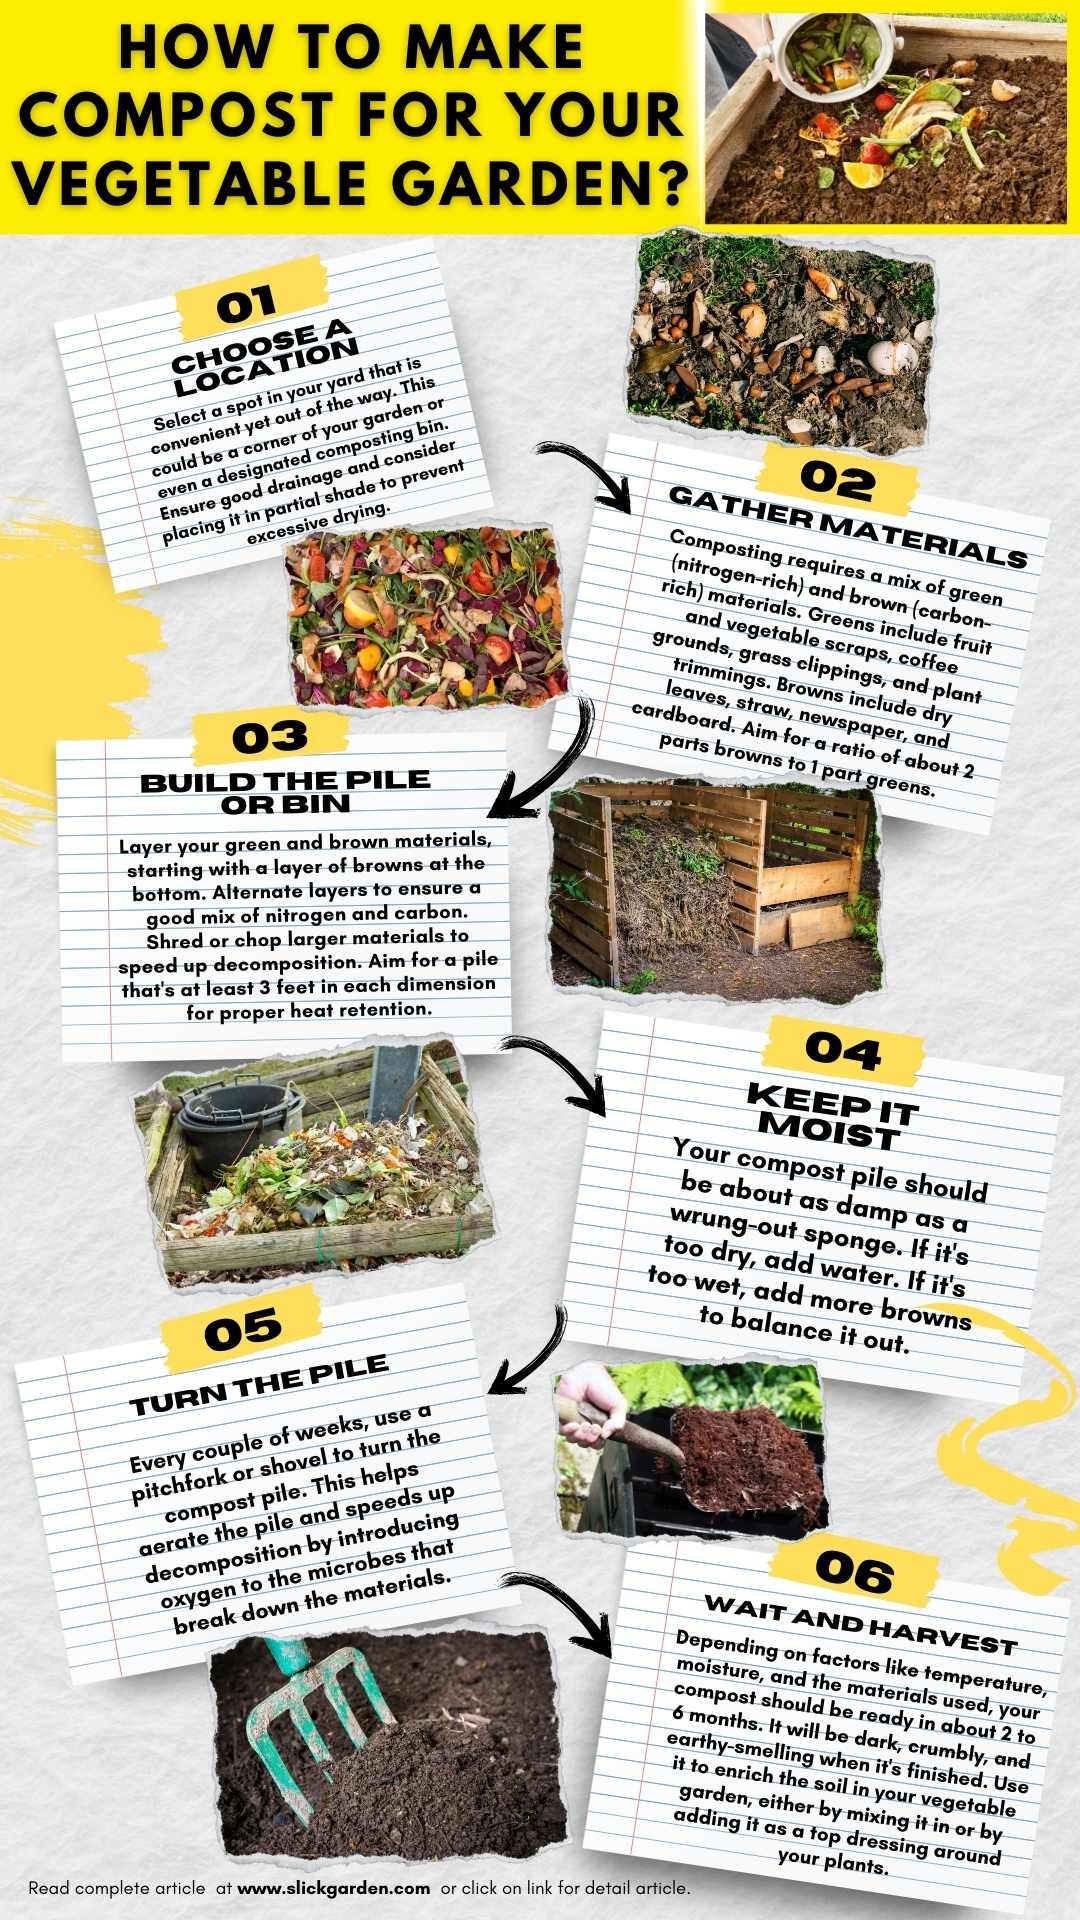 How To Make Compost In Easy Steps? infographic